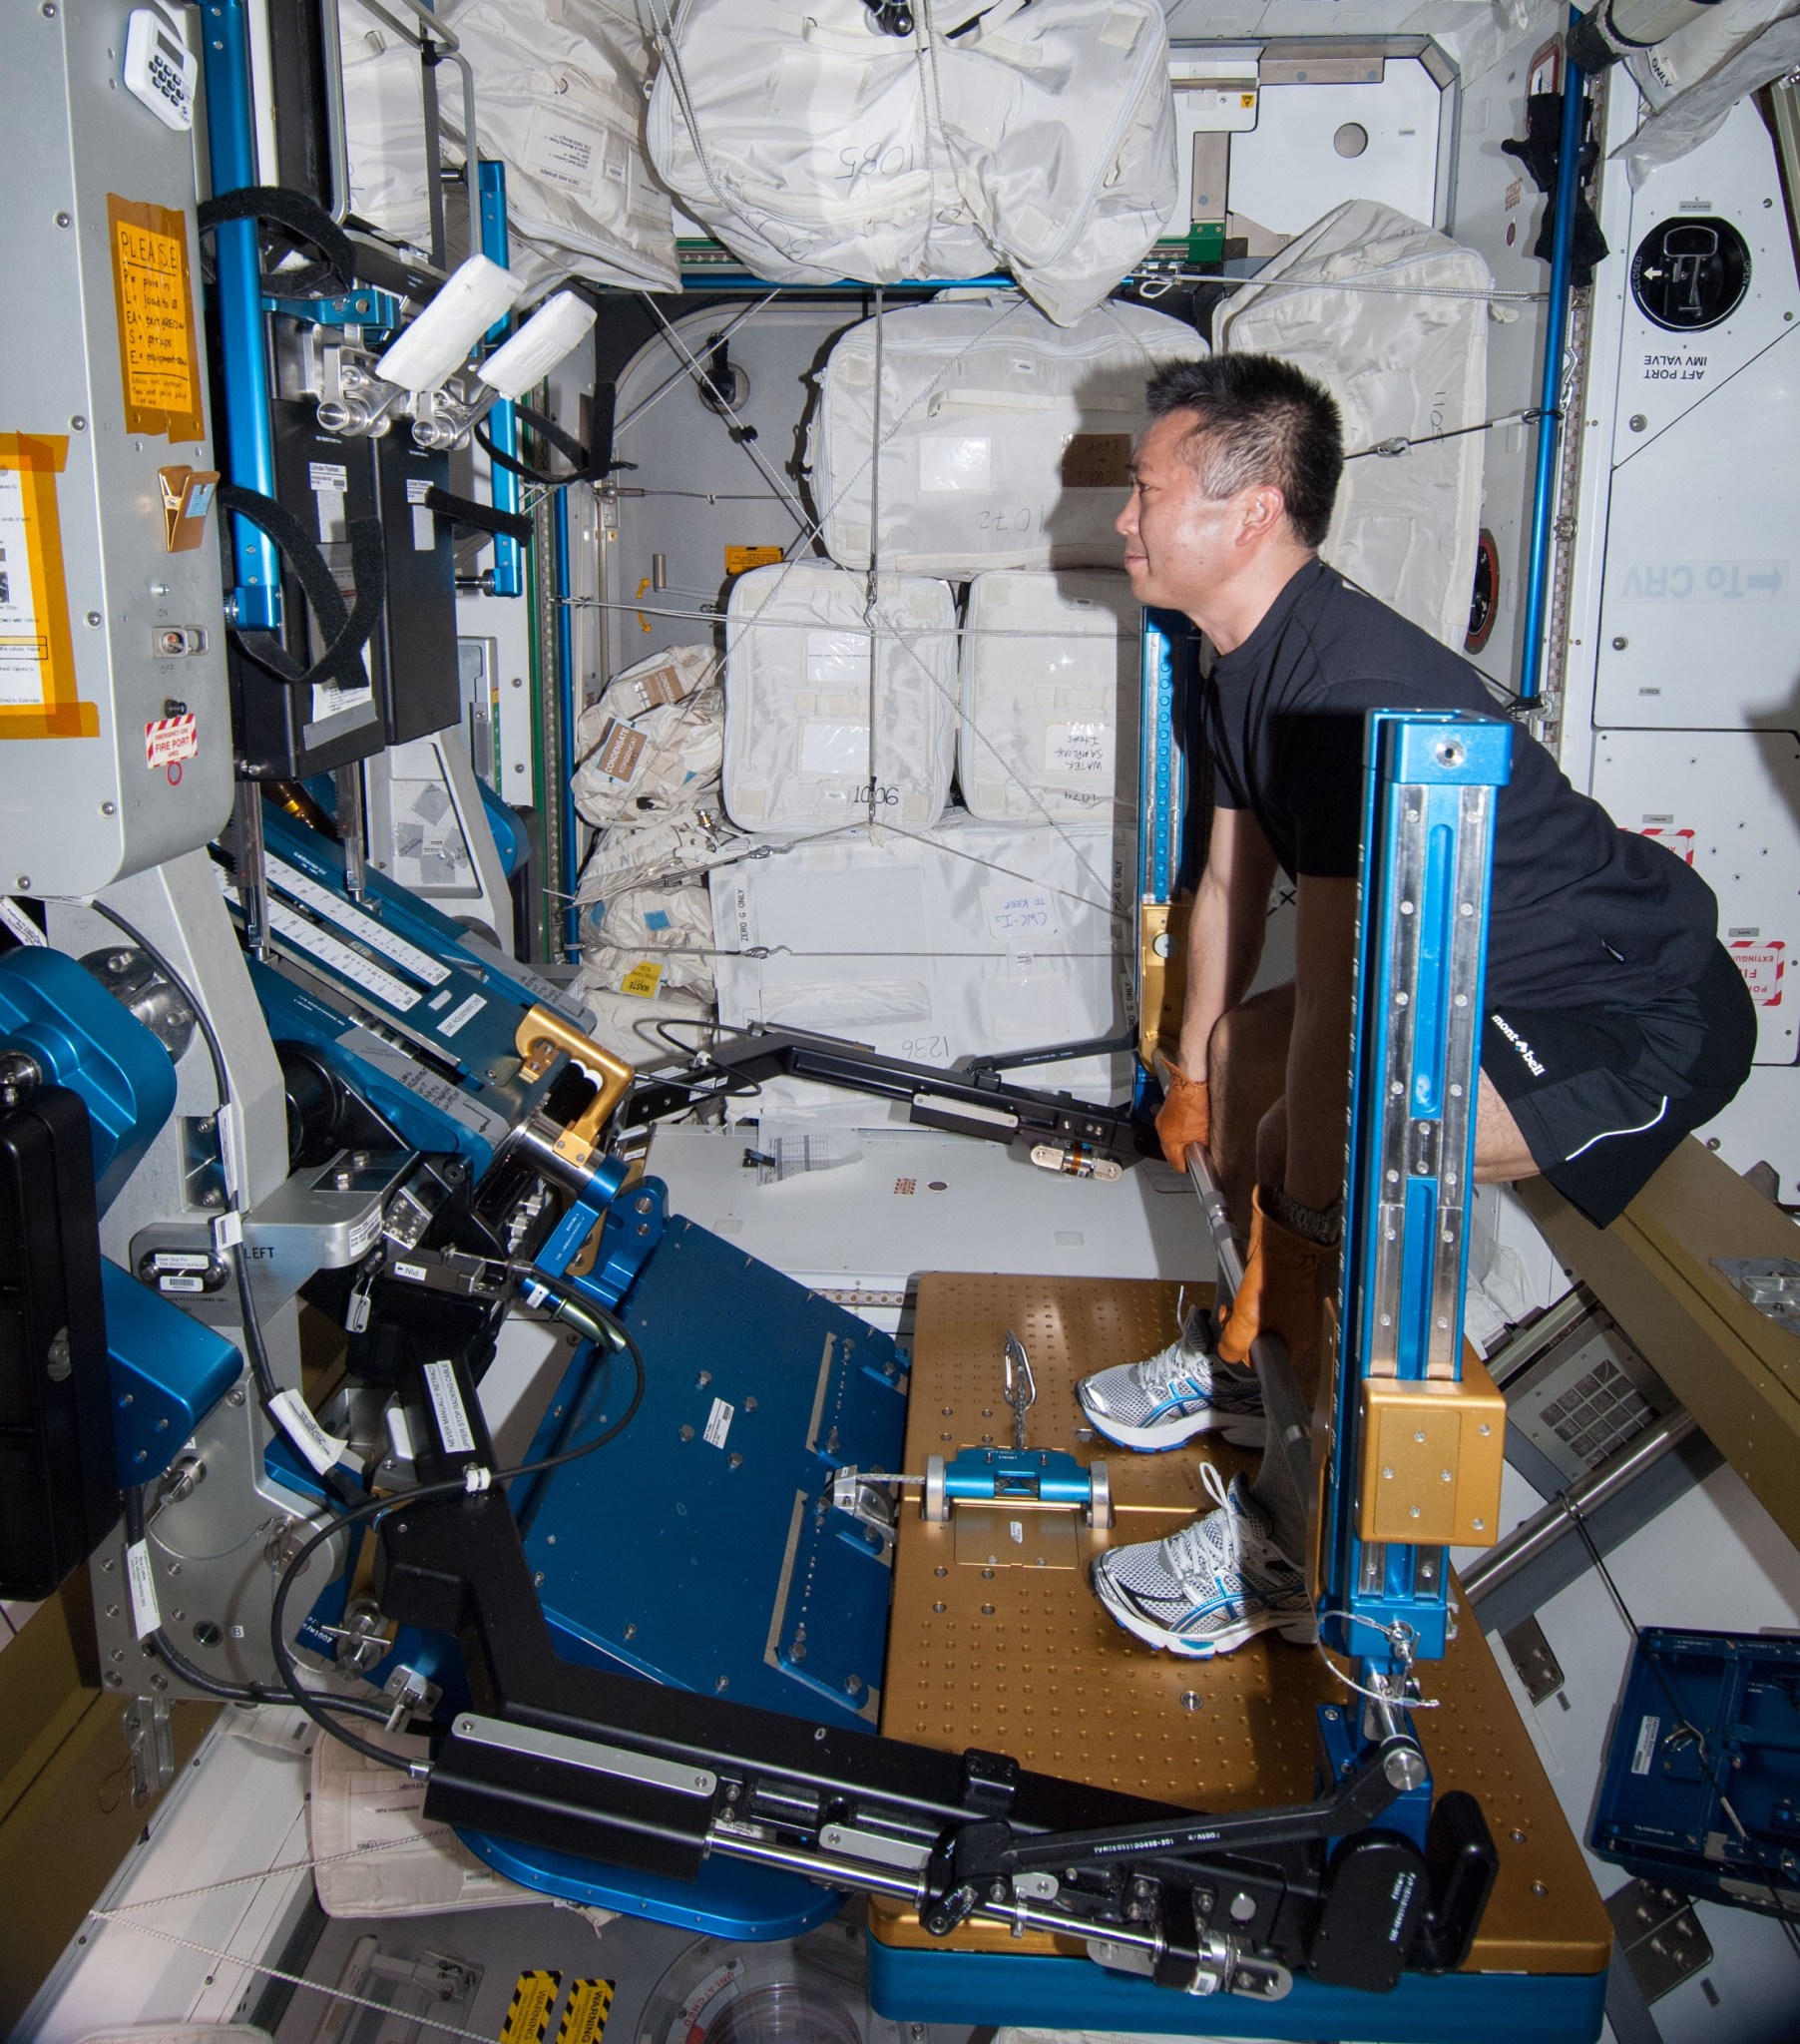 View of Koichi Wakata, Expedition 38 flight engineer, exercising on the Advanced Resistive Exercise Device, in Node 3 on the International Space Station on Nov. 15, 2013.